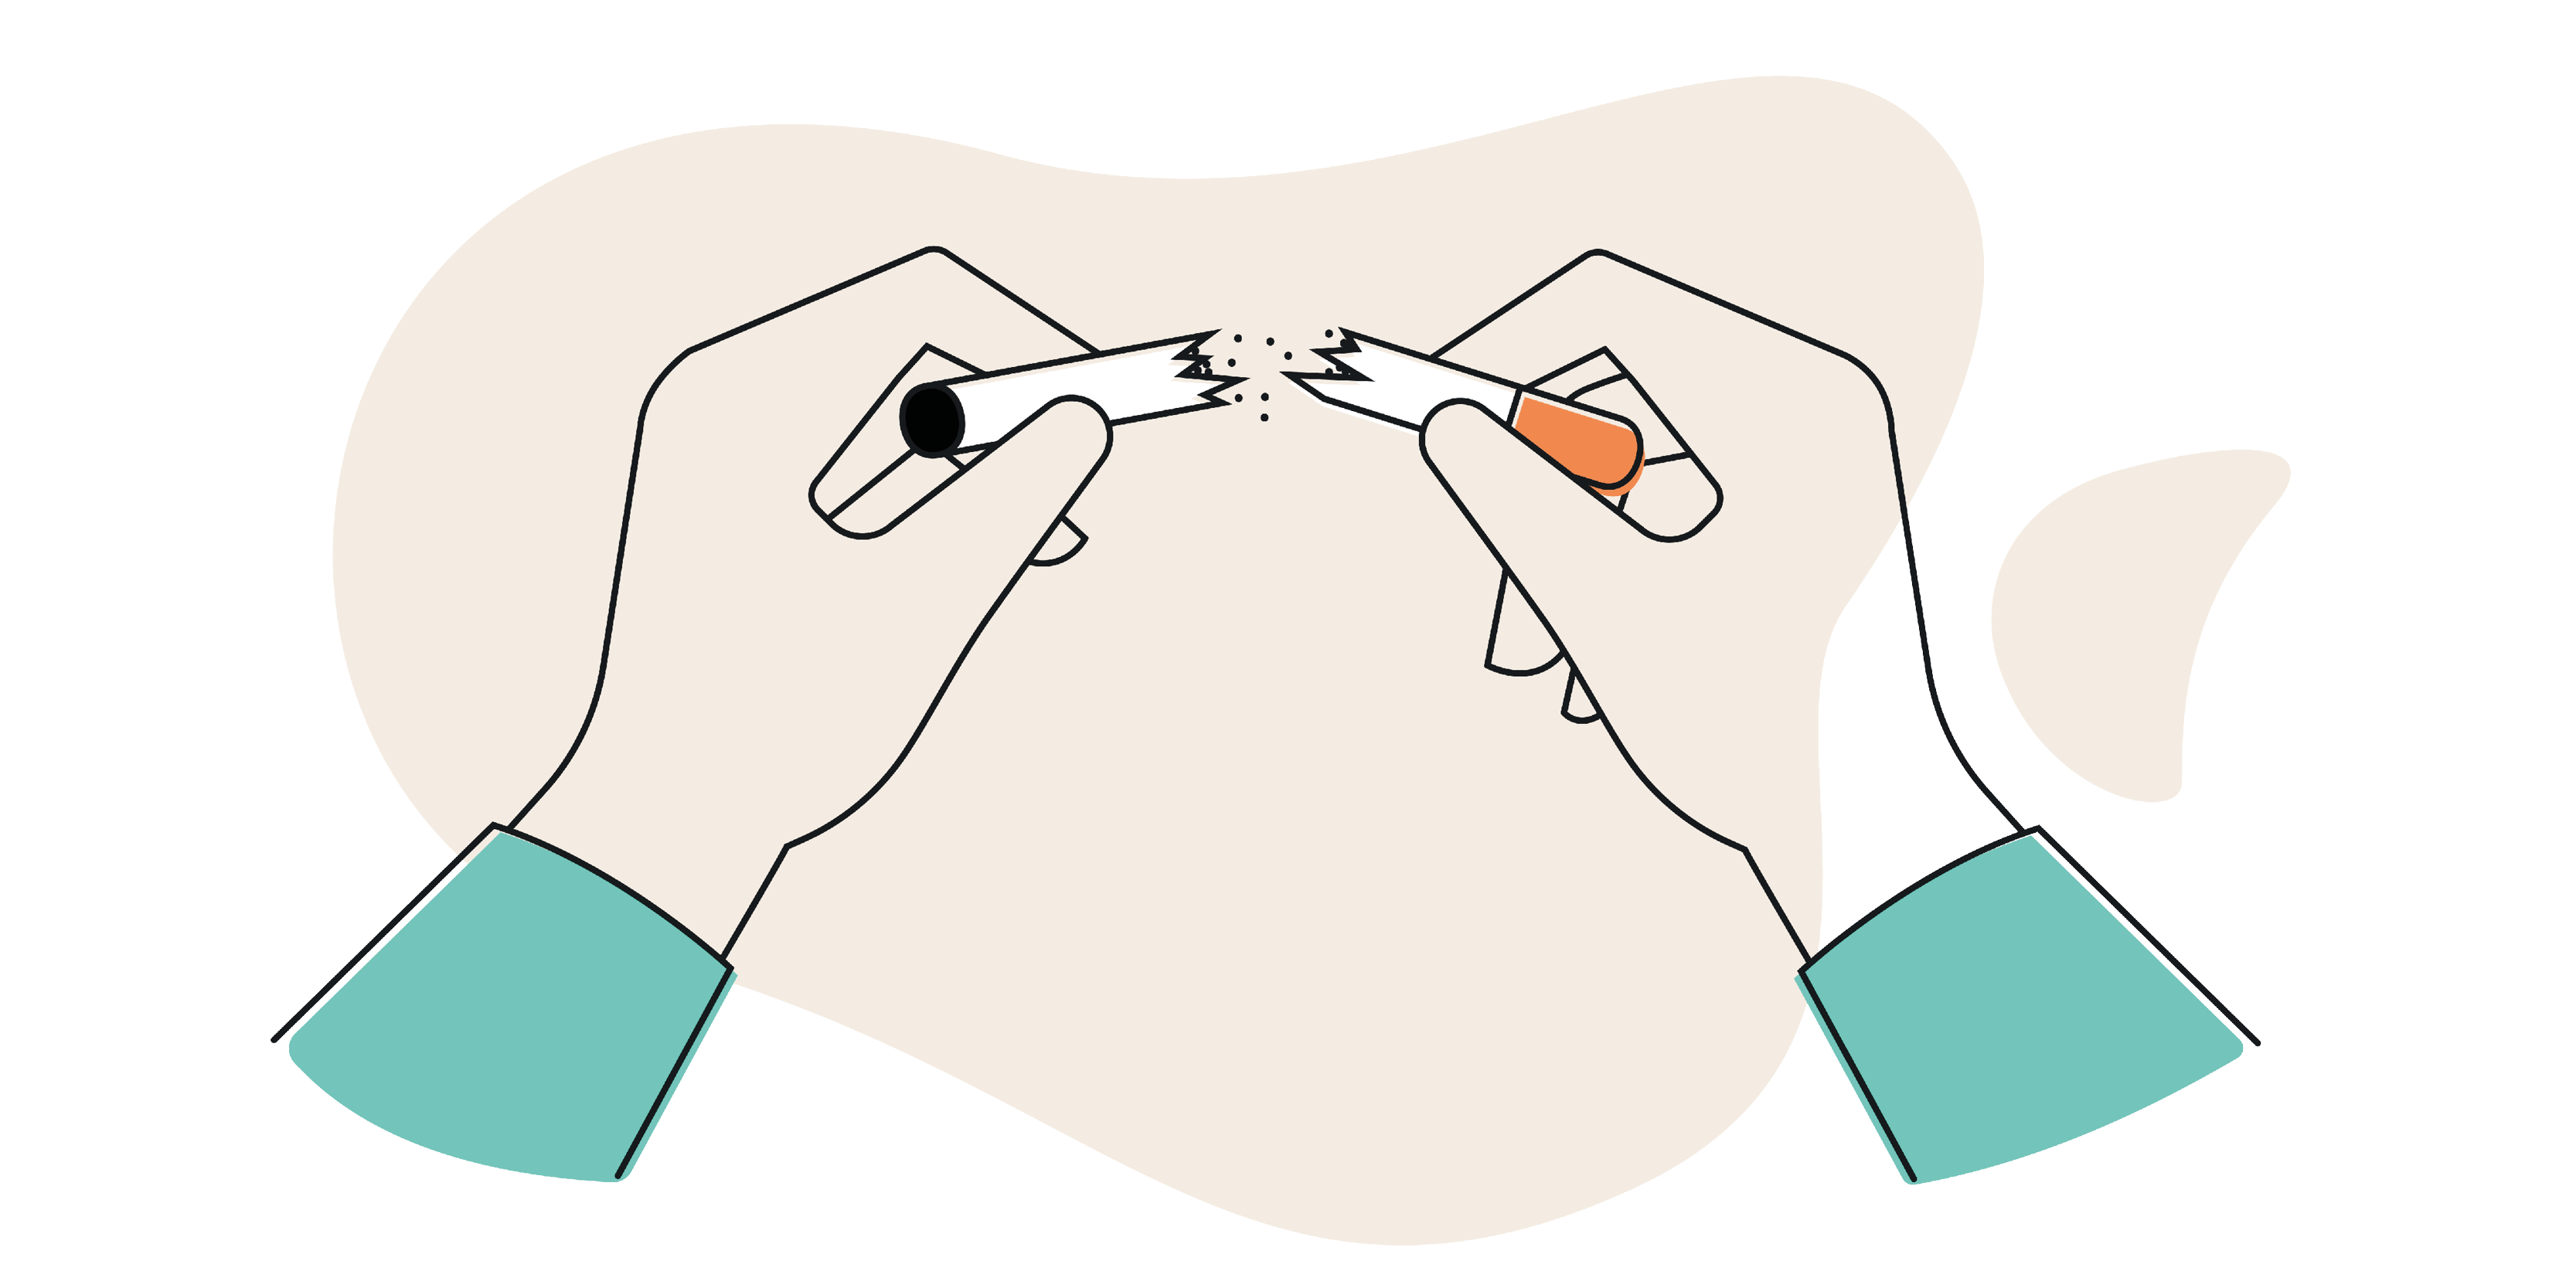 Illustration of 2 hands snapping a cigarette